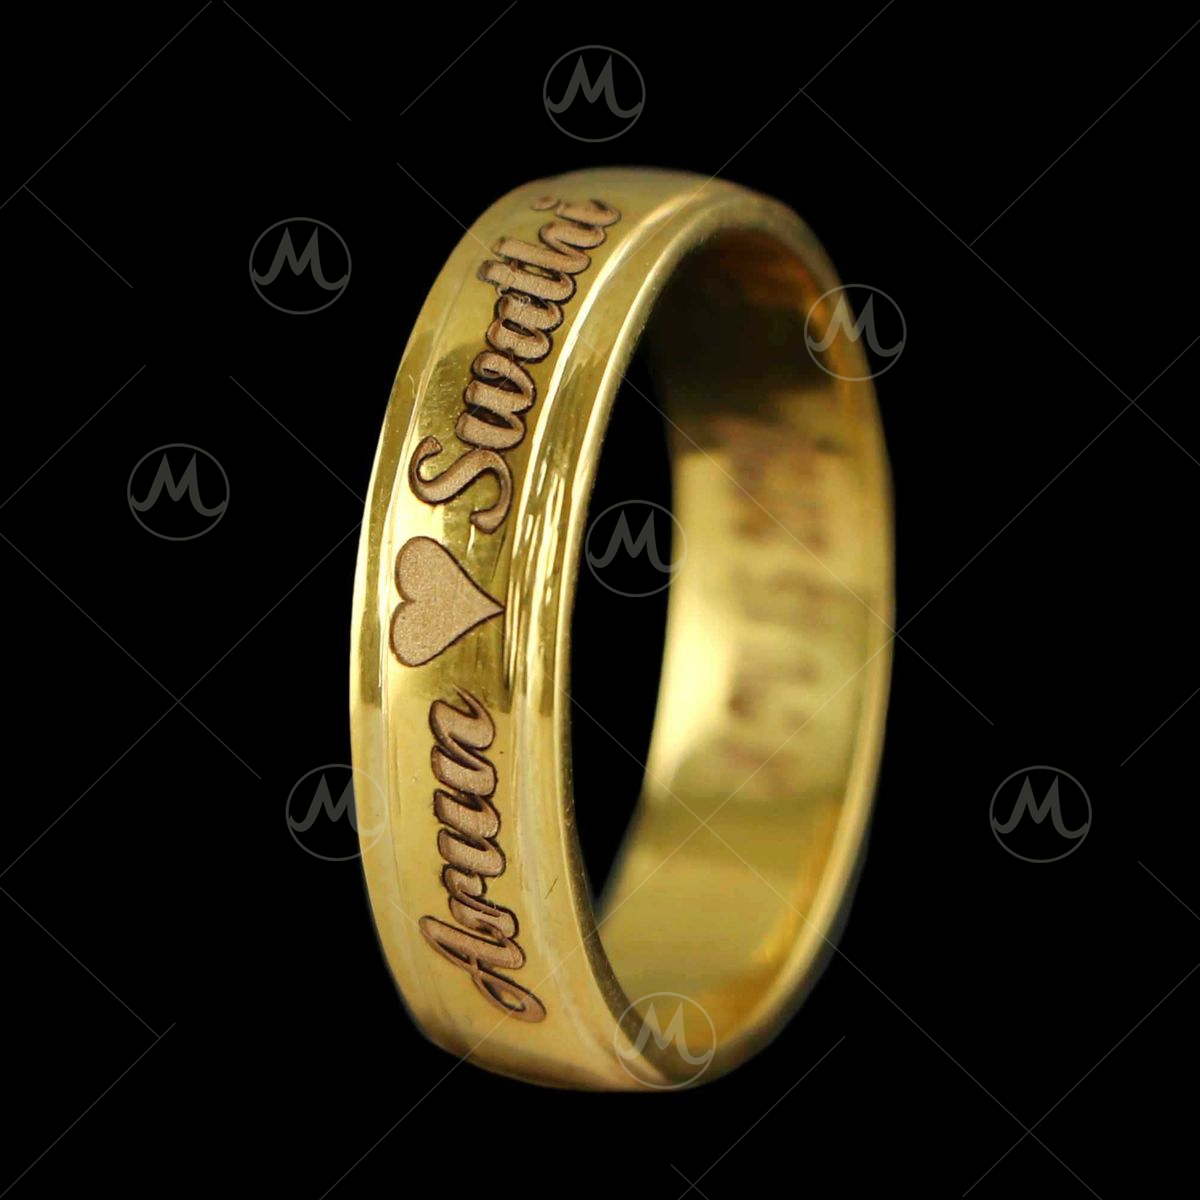 Amazon.com: Personalized Gold Stainless Steel Wedding Ring Couple's Ring  Set Custom Engraved Free - Ships from USA: Clothing, Shoes & Jewelry